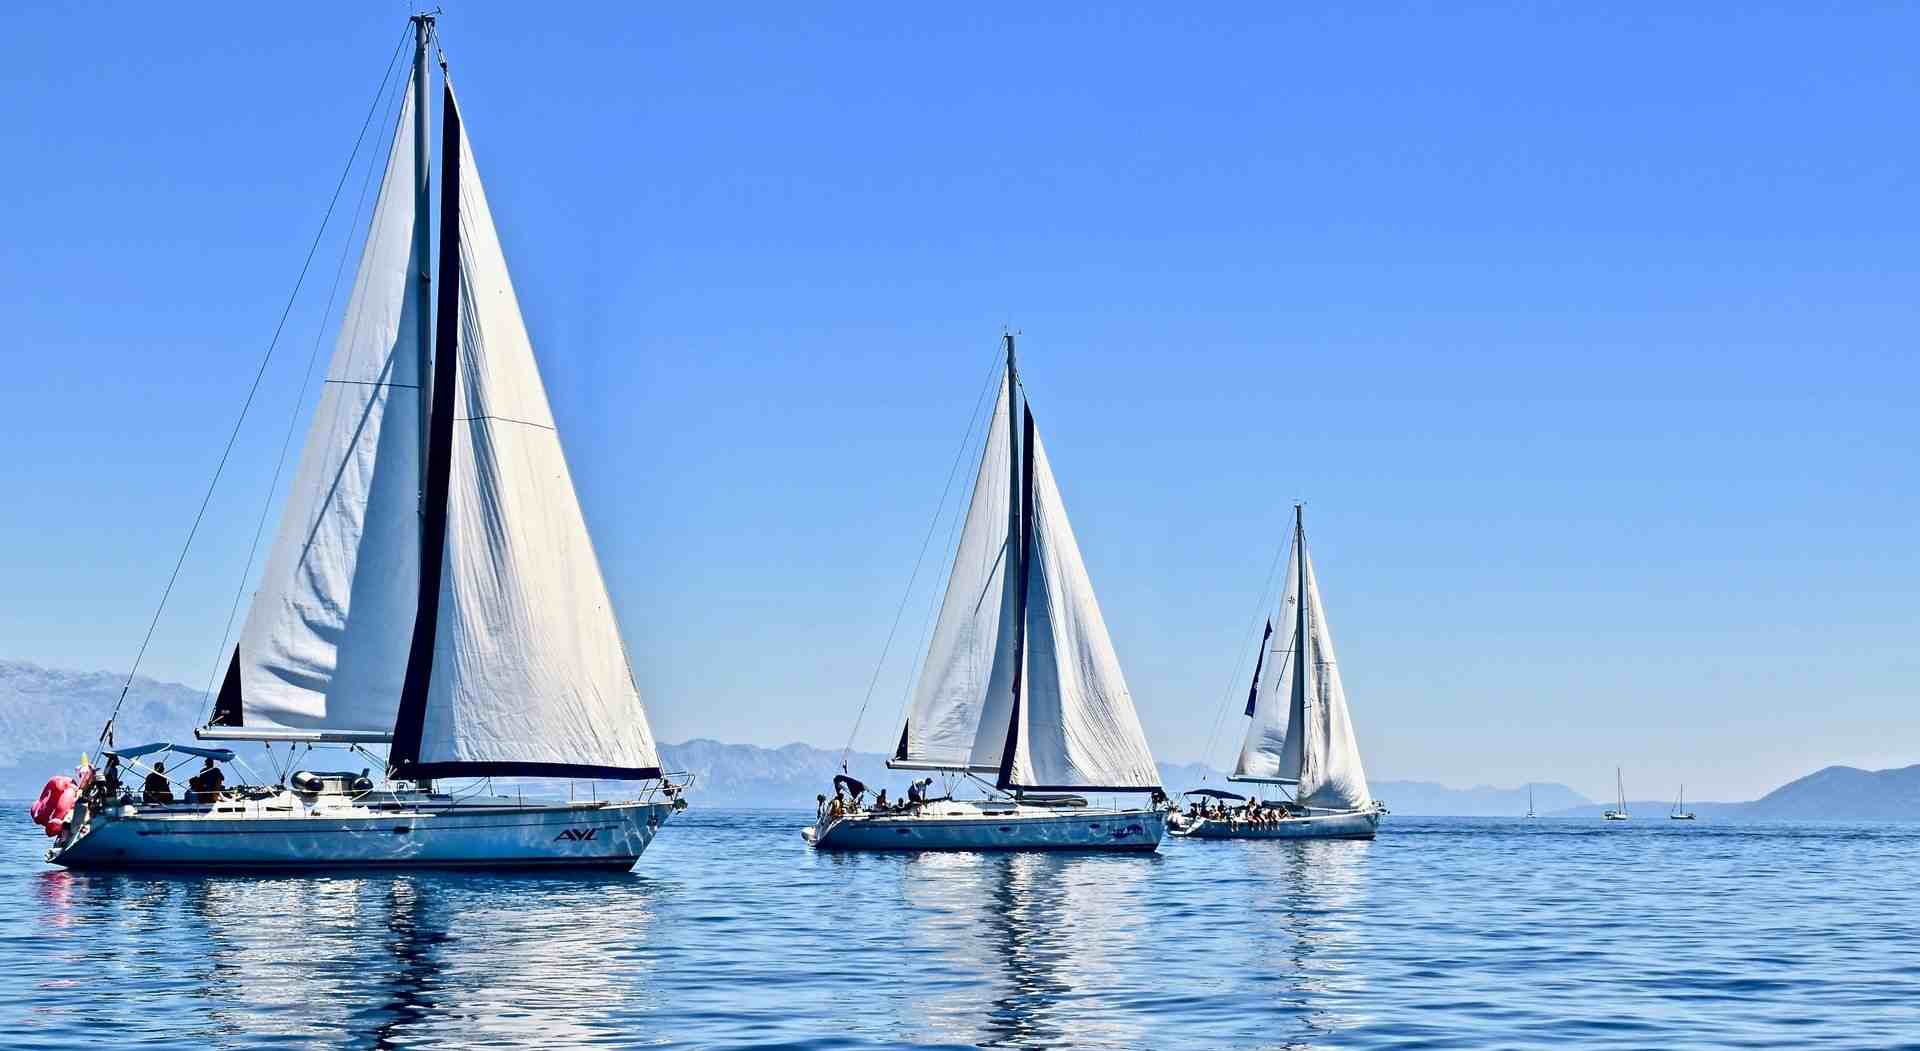 sailing yachts on the water